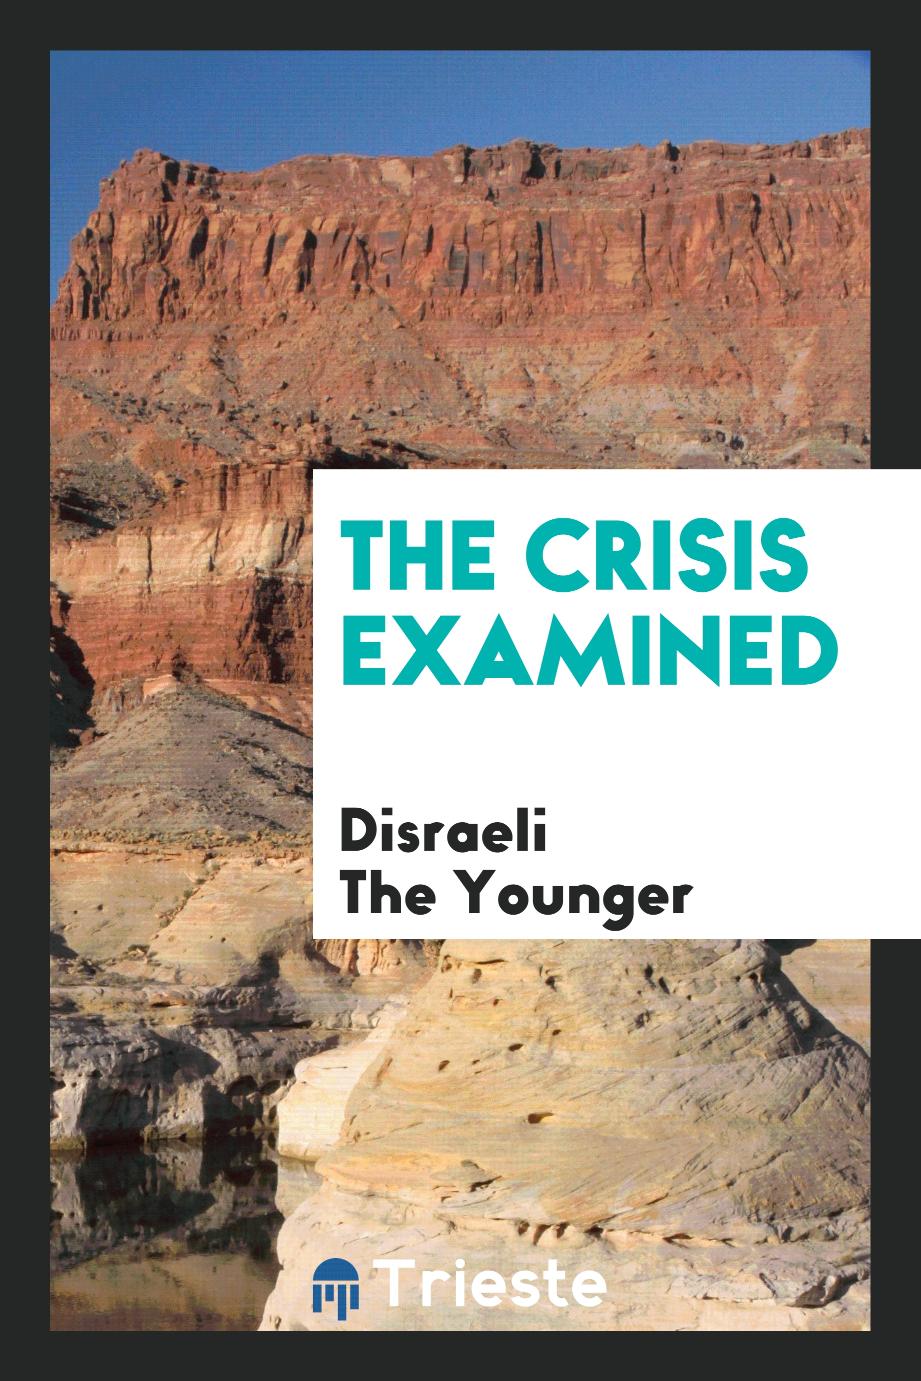 The crisis examined